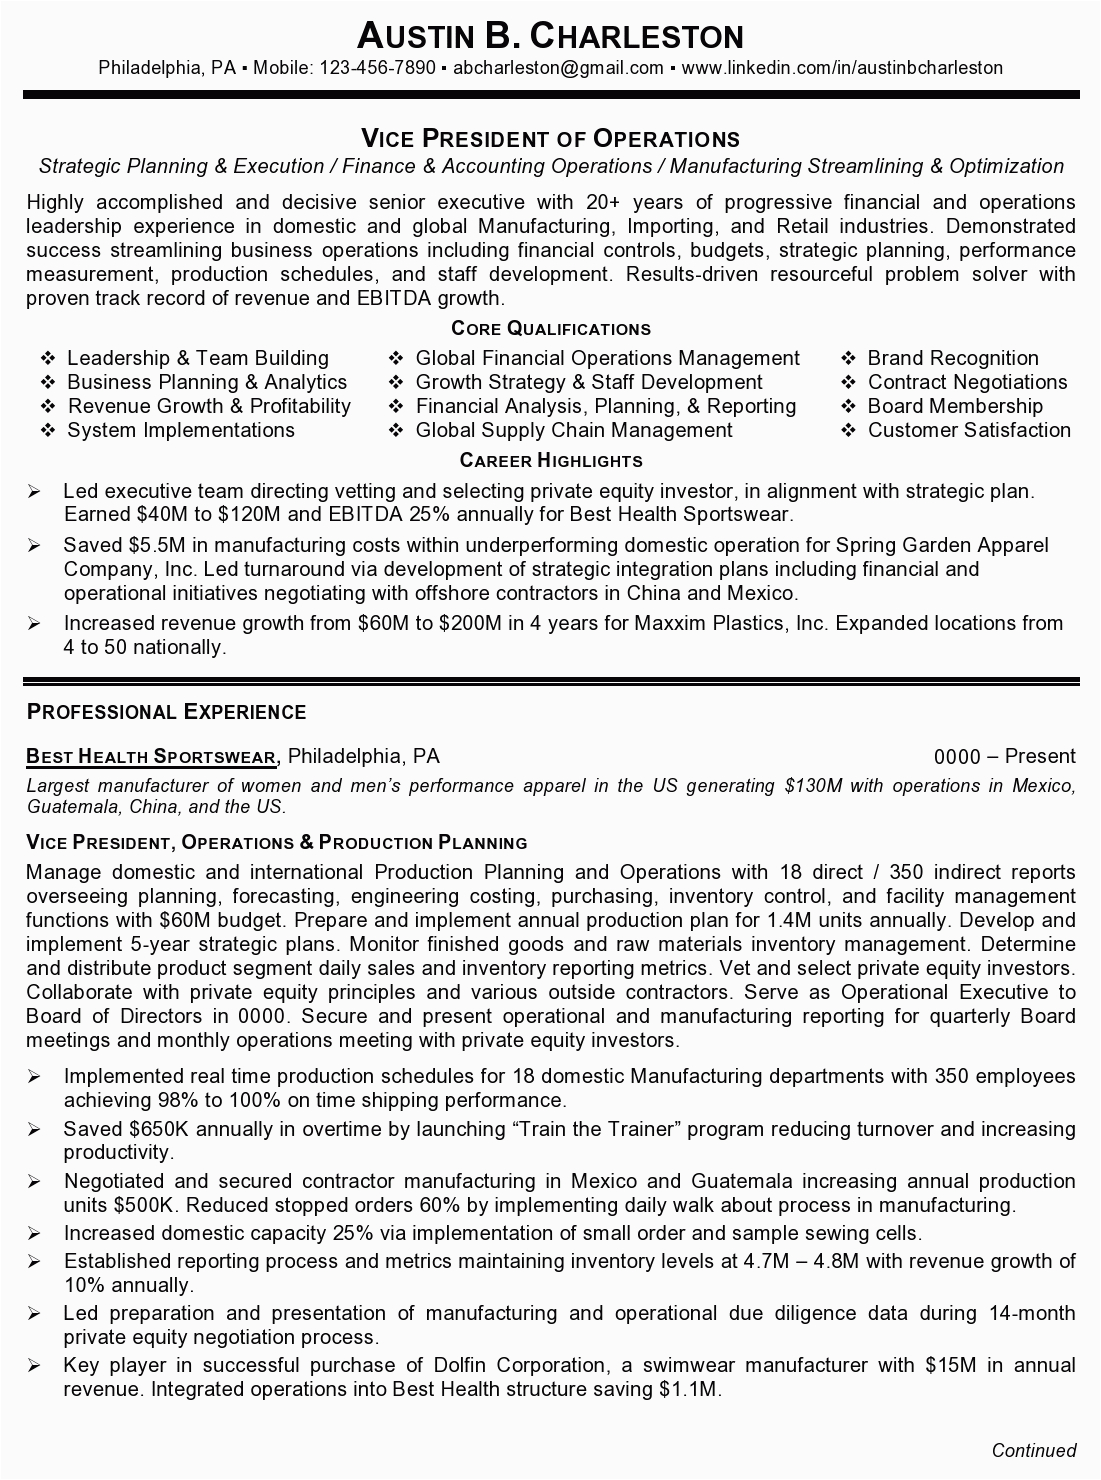 Vice President Of Operations Resume Samples Resume Sample 4 Vice President Of Operations – Career